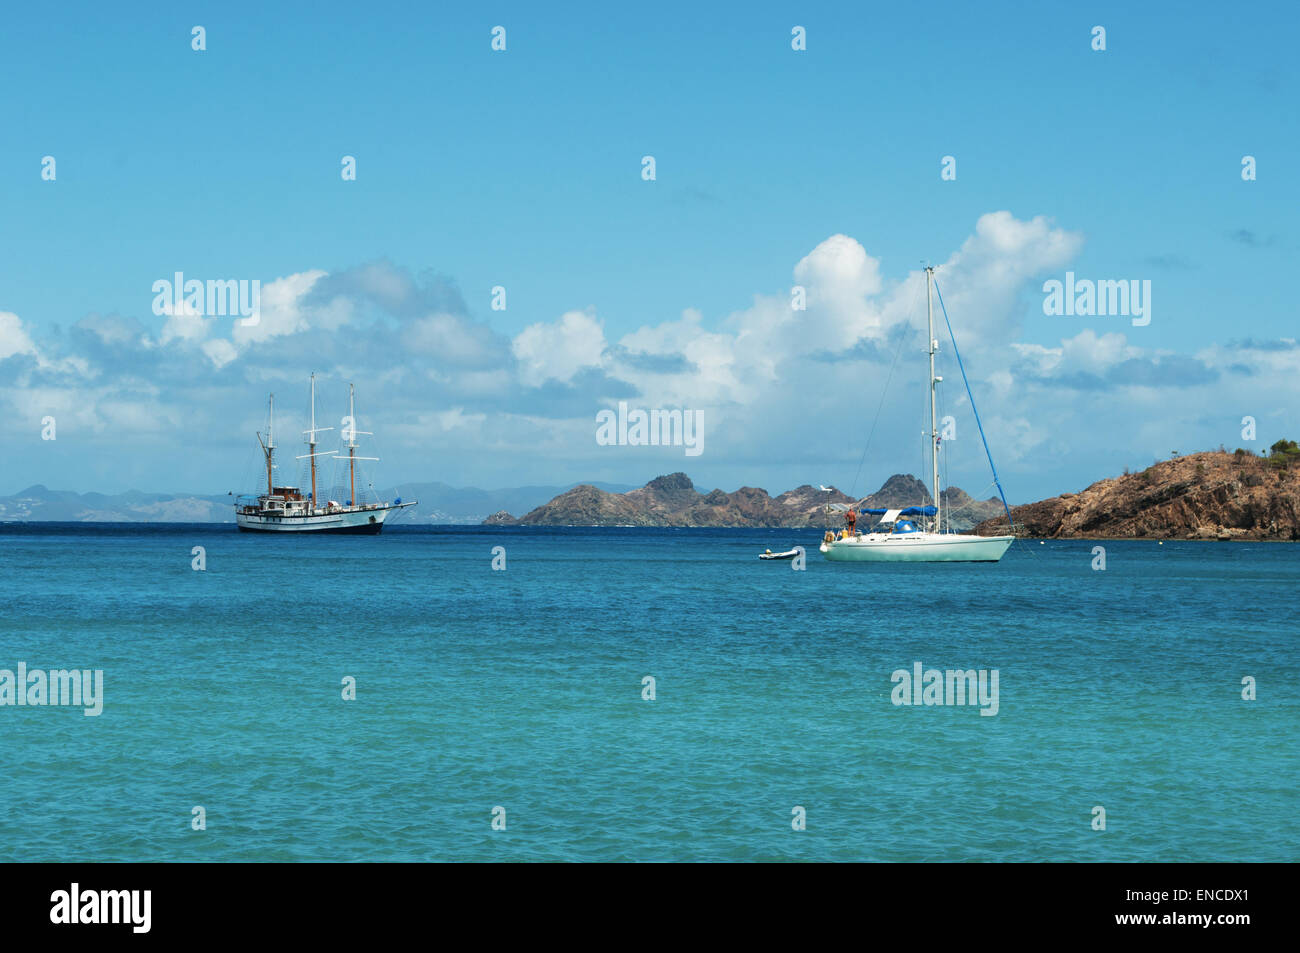 St Barth, St. Barths, Saint-Barthélemy, French West Indies, French Antilles: a sailboat and a sailing ship in the Caribbean Sea Stock Photo